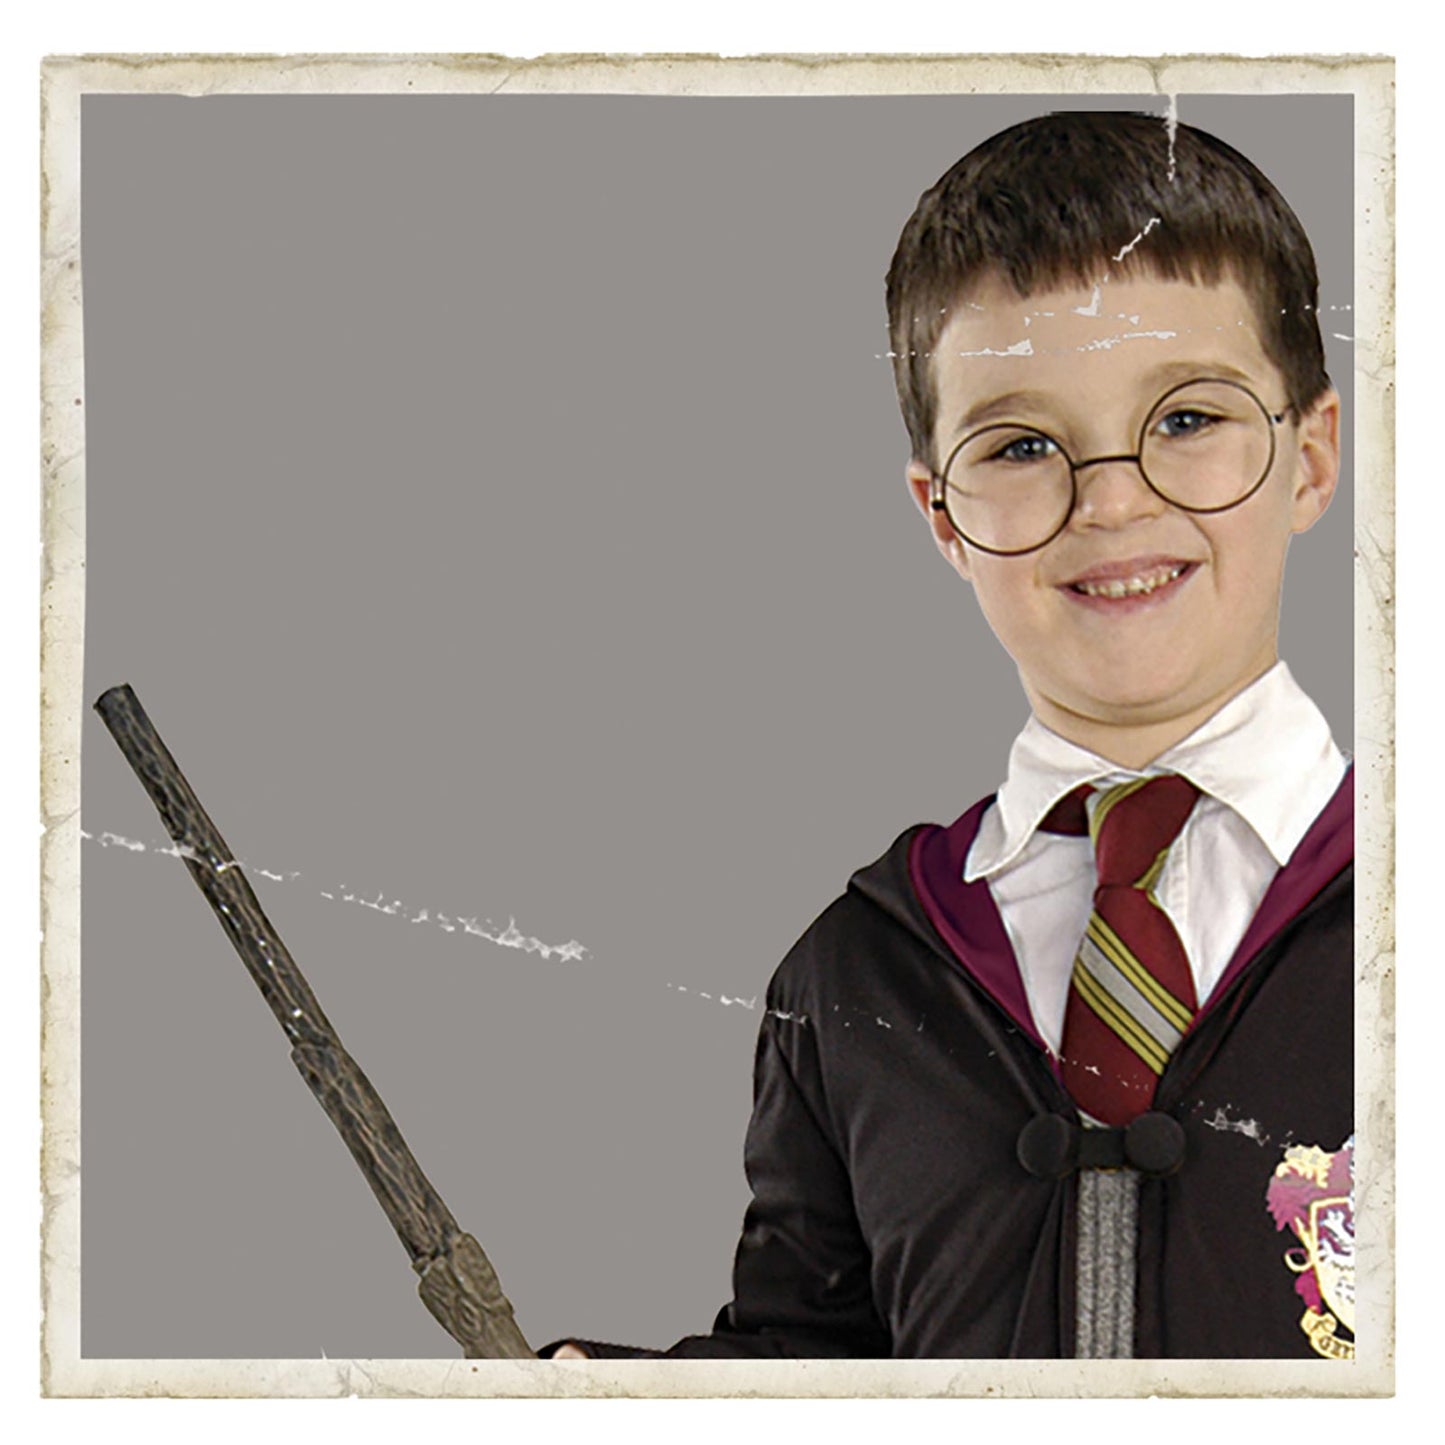 Harry Potter Wand and Glasses Costume Kit Child